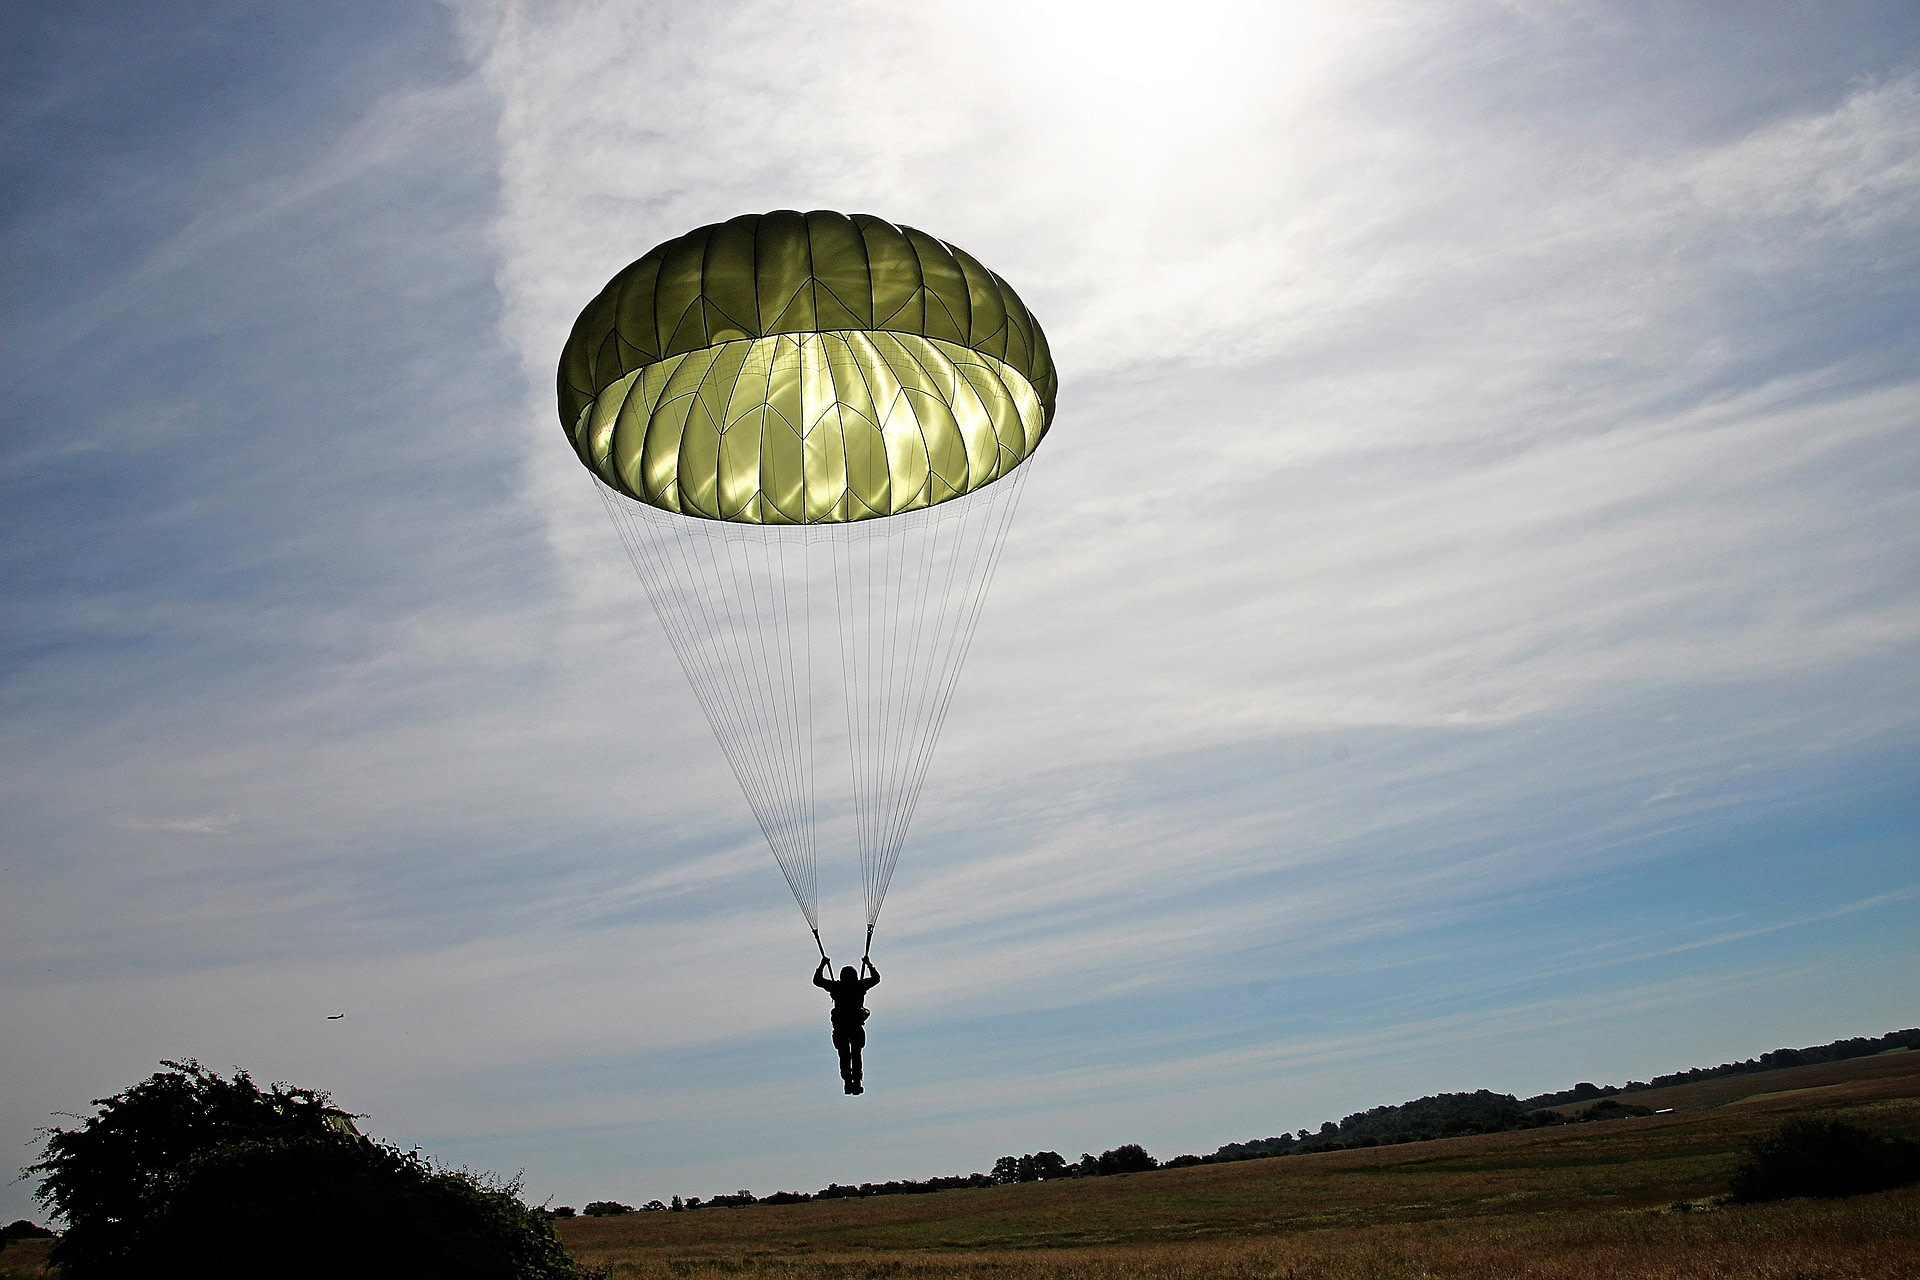 A skydiver comes in for a landing.